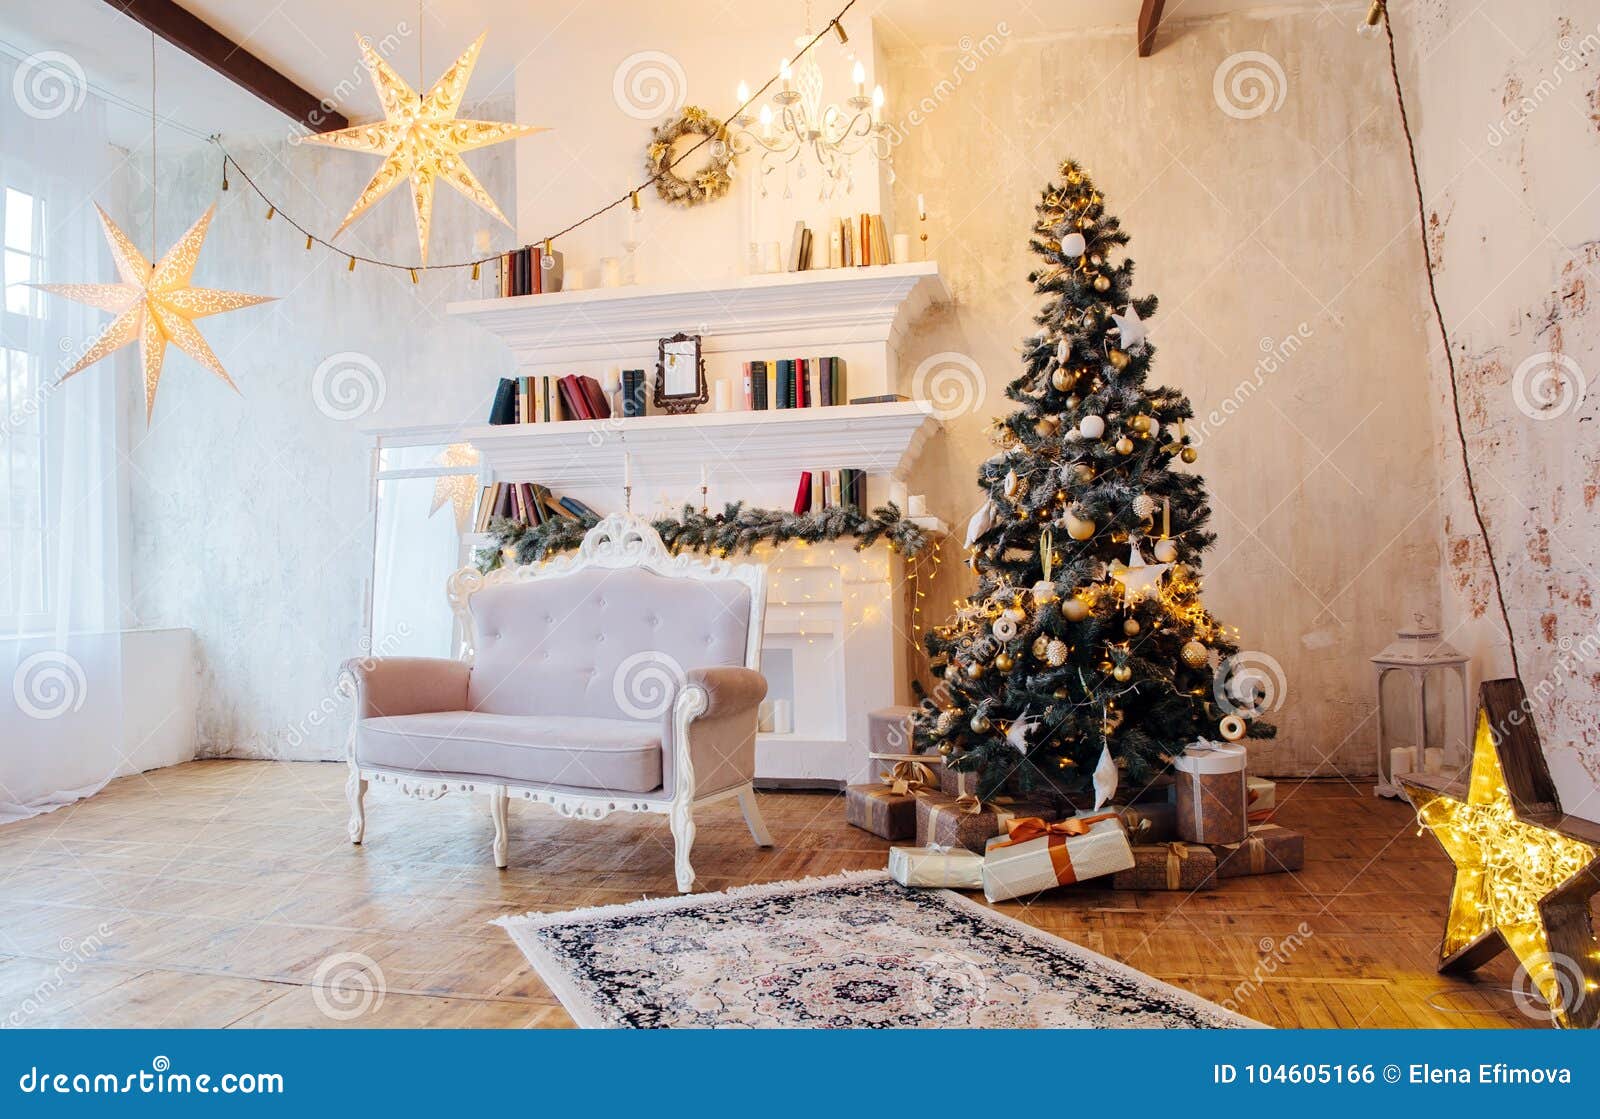 Interior of Beautiful Room with Christmas Decorations Stock Photo ...